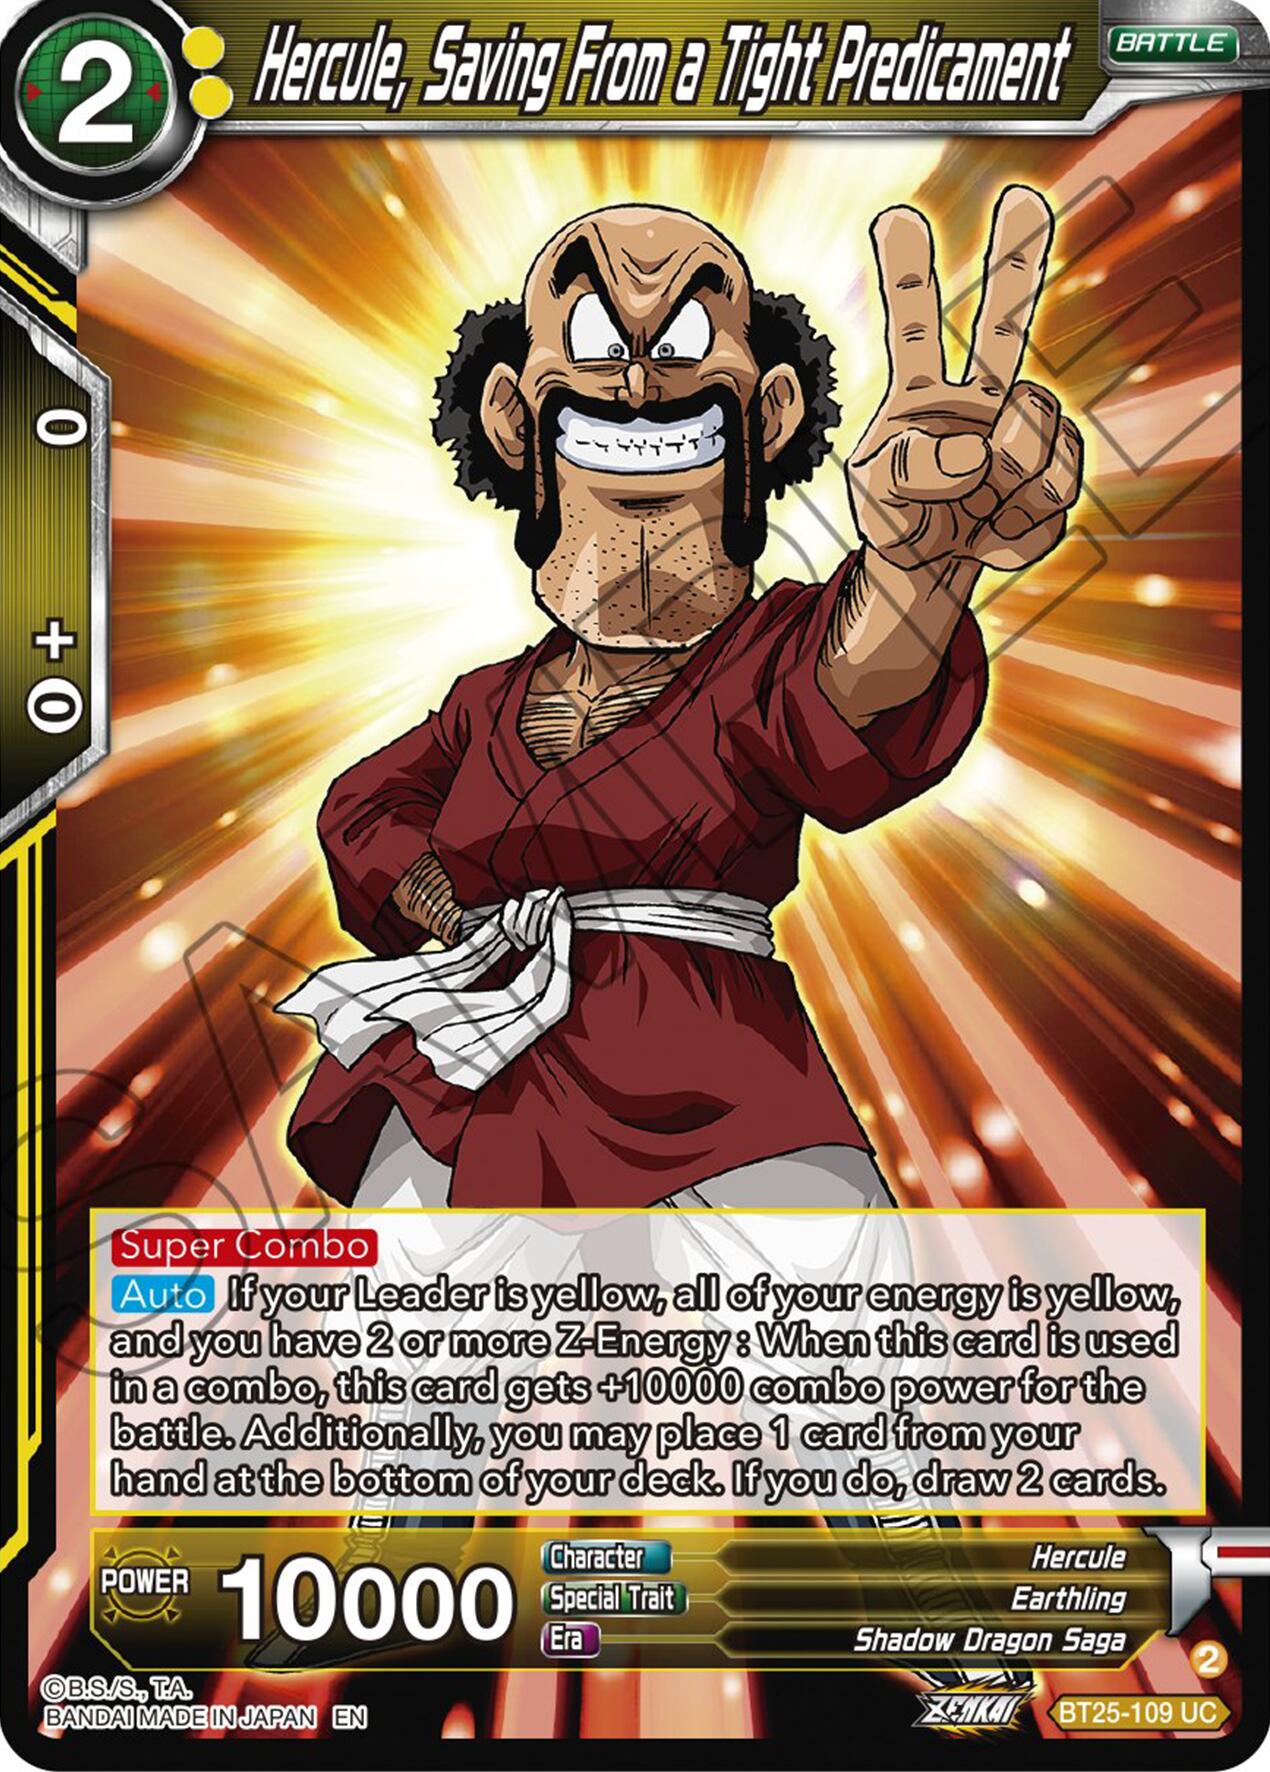 Hercule, Saving From a Tight Predicament (BT25-109 UC) [Legend of the Dragon Balls] | North Valley Games